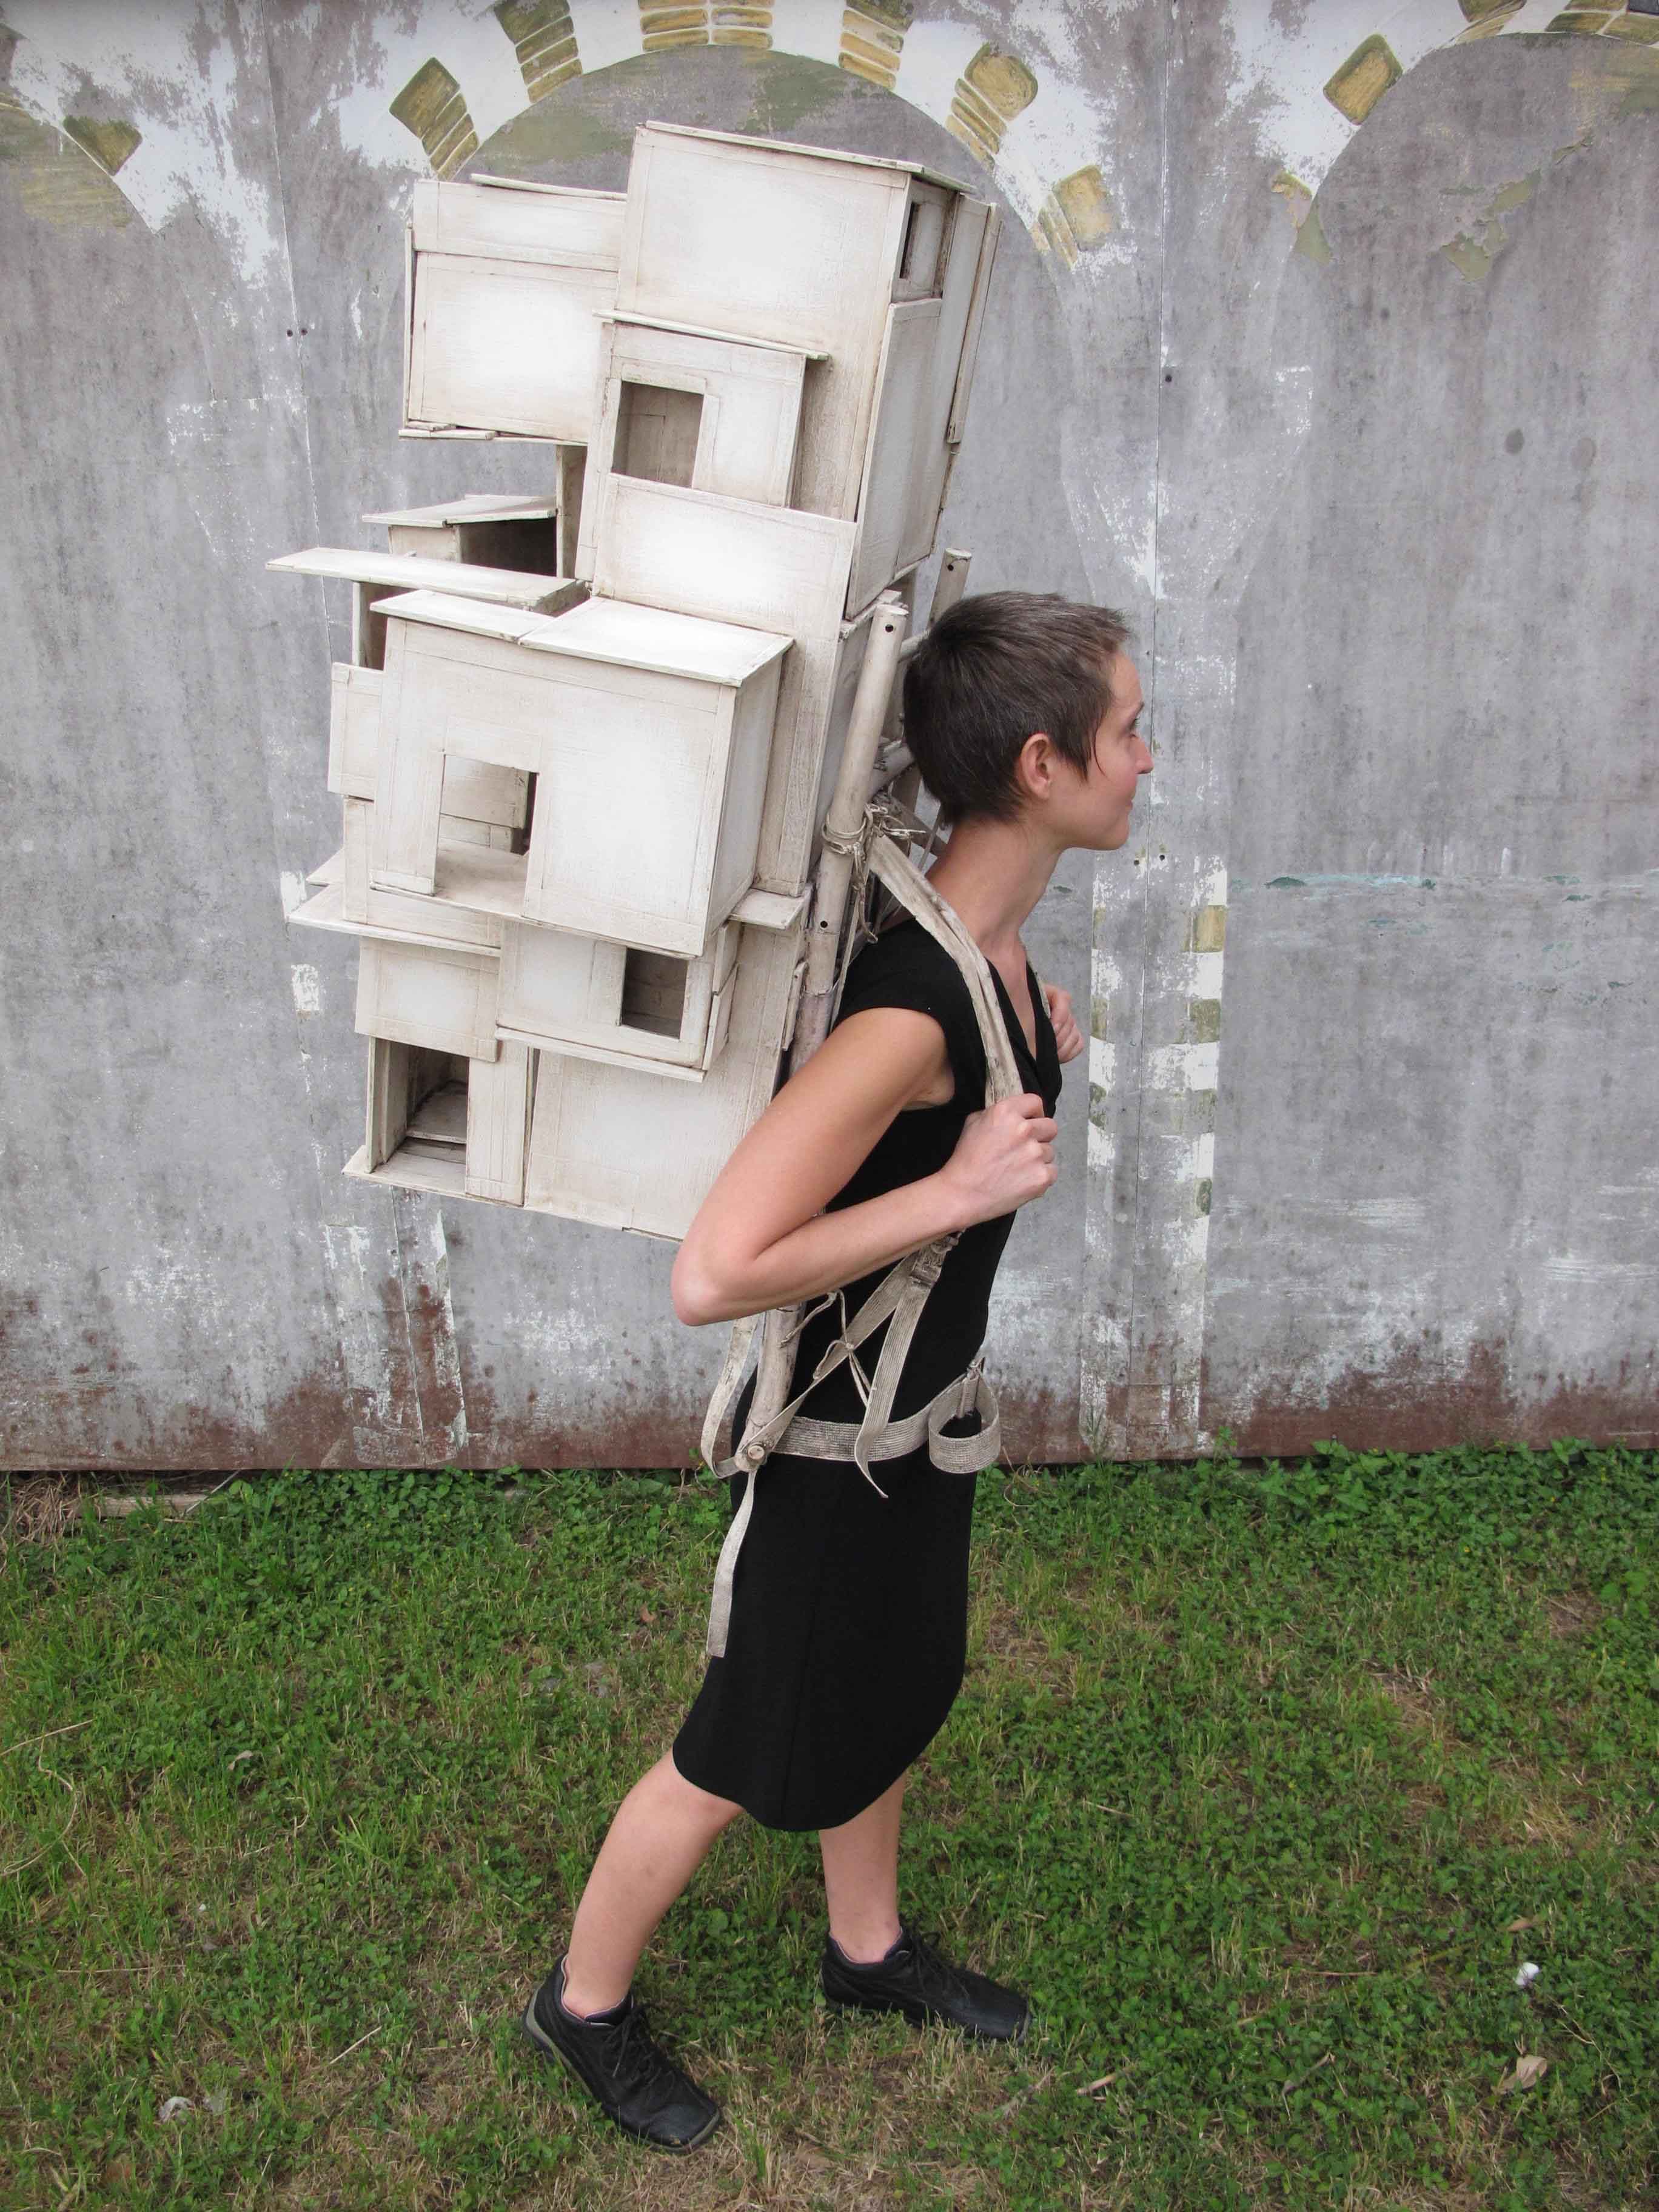 a backpack that looks like houses smushed together